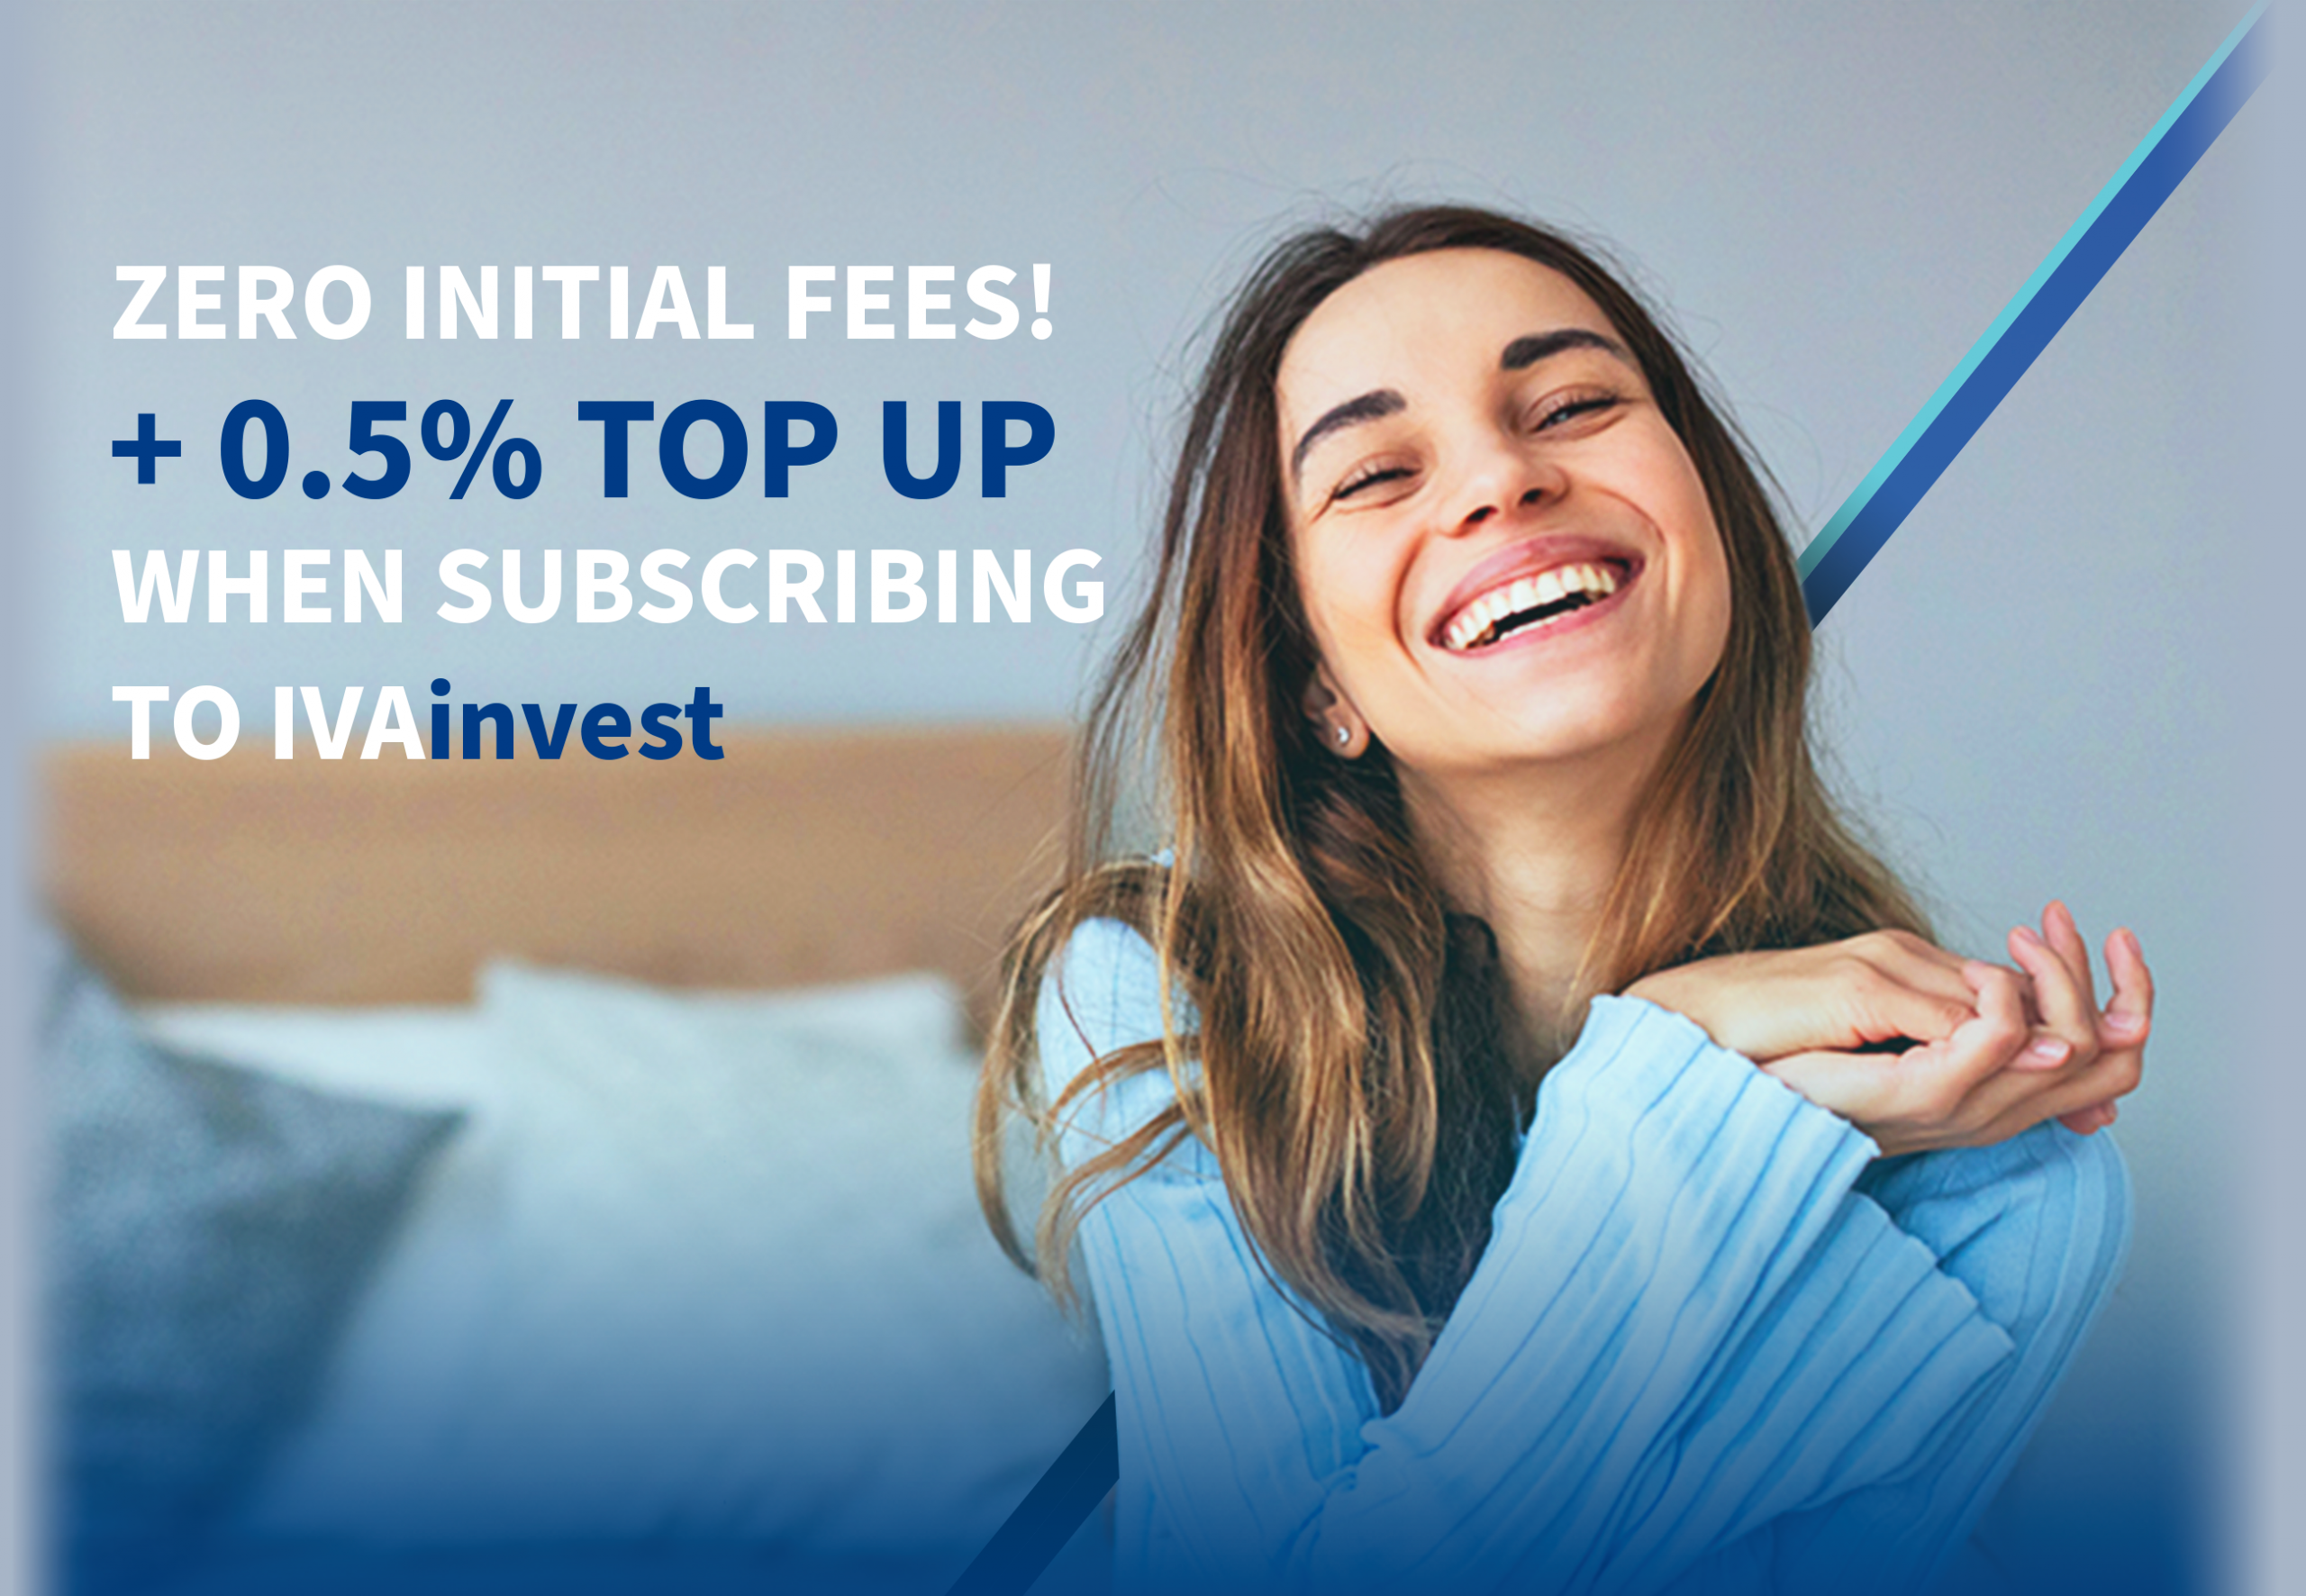 Get your IVAinvest plan and we will top up your investment by 0.5%